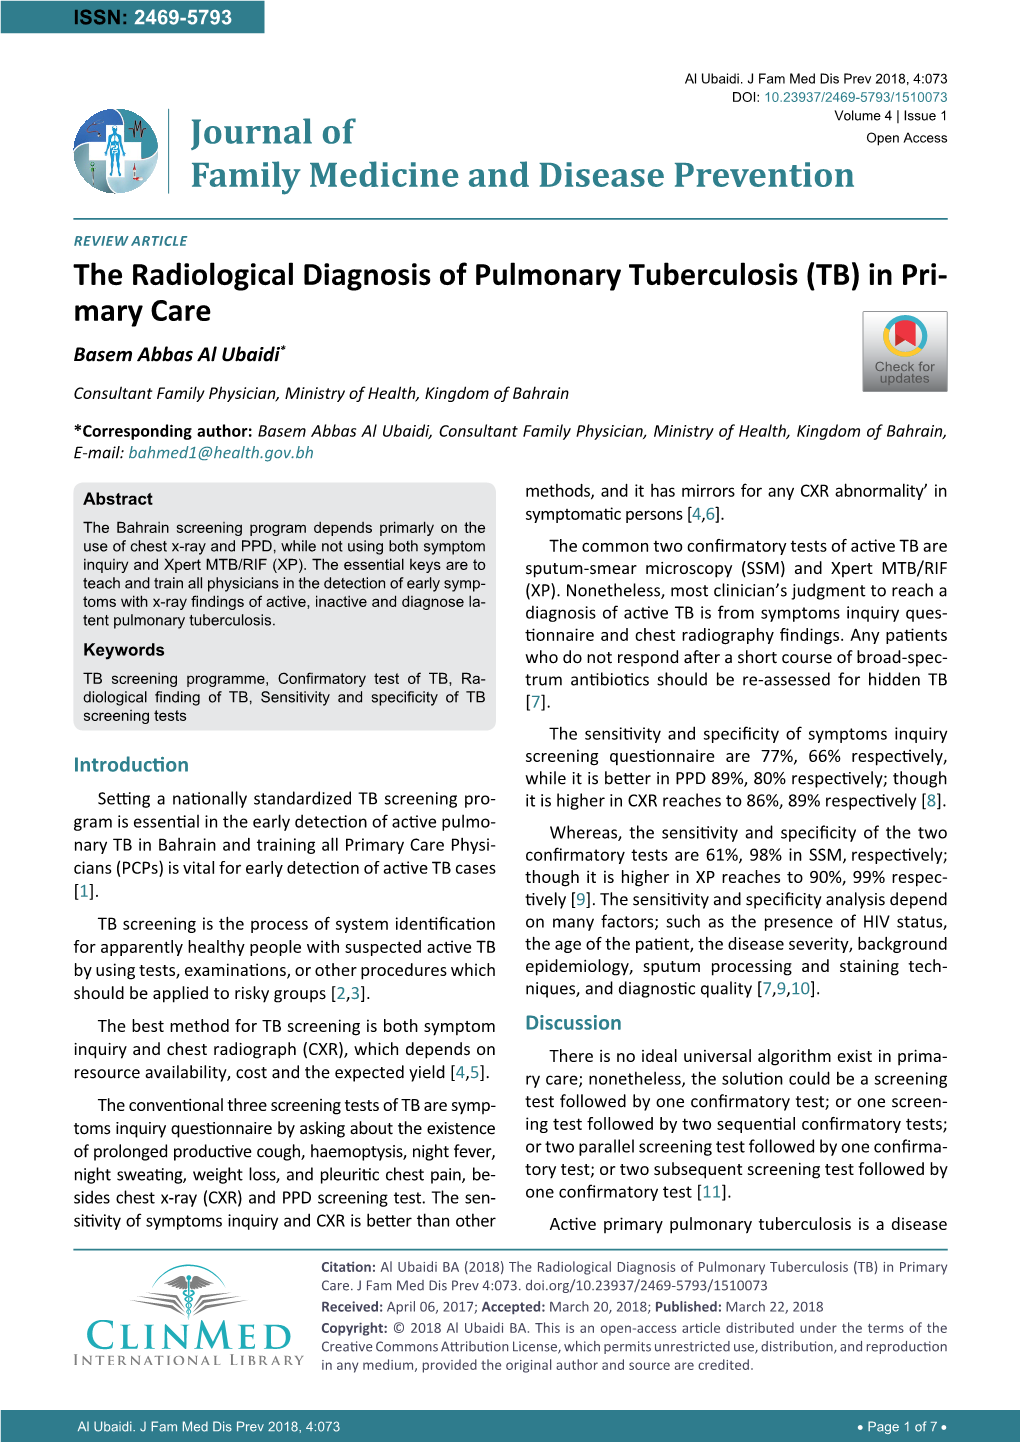 The Radiological Diagnosis of Pulmonary Tuberculosis (TB) In